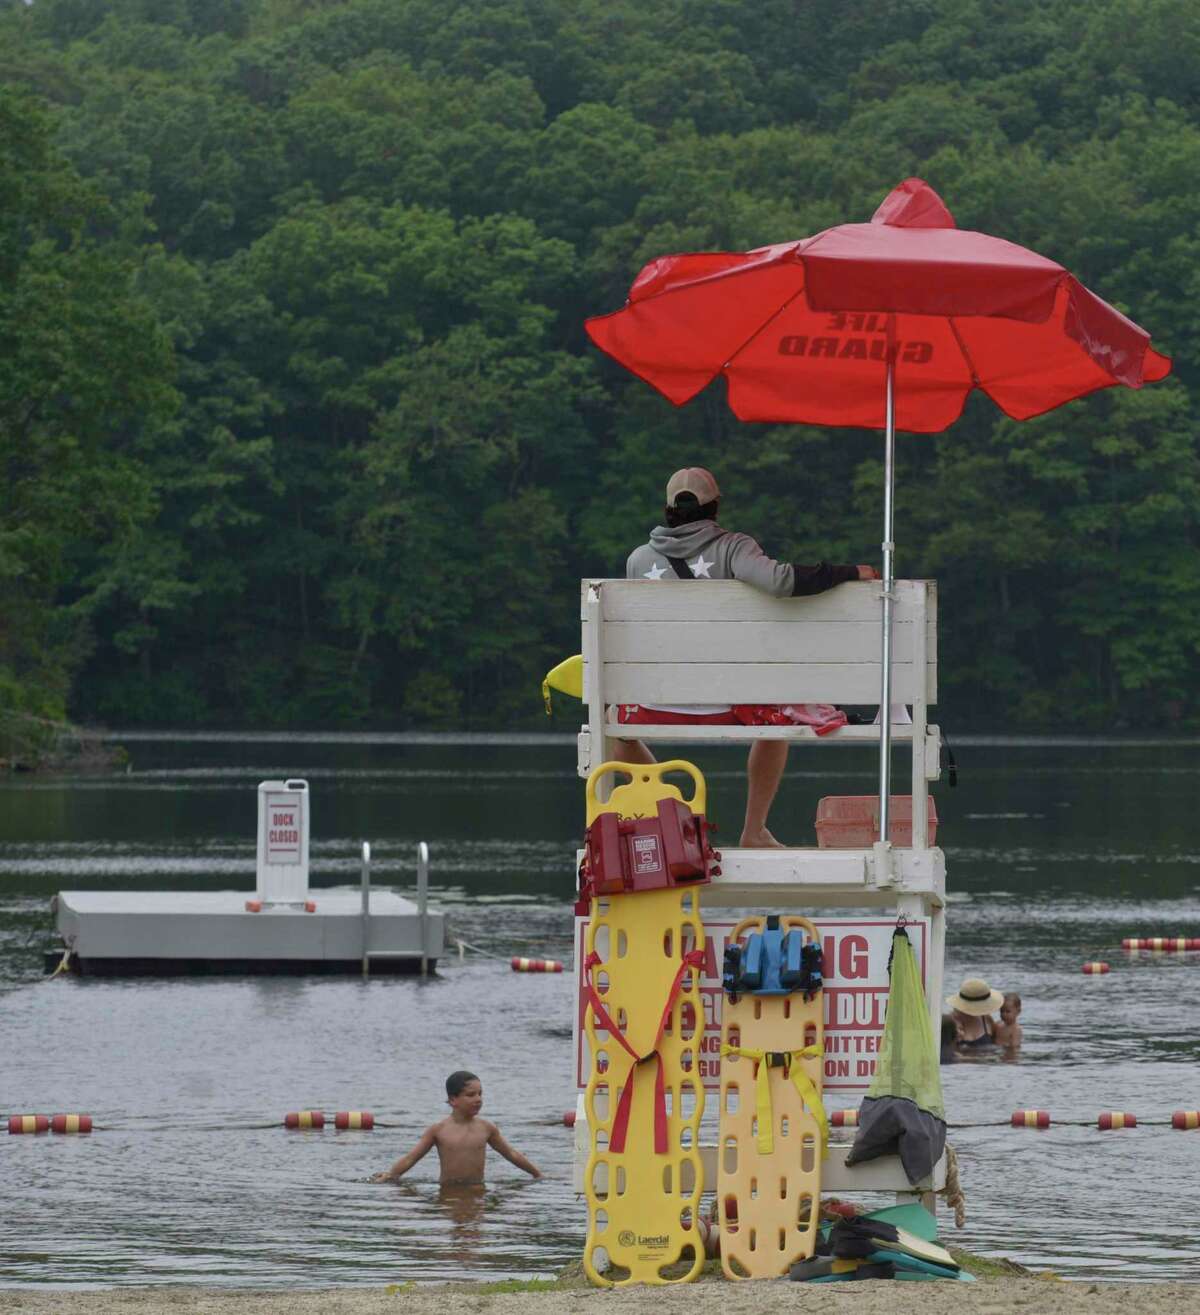 Head lifeguard Charlie Wilson of Easton, keeps an eye on swimmers at Topstone Park beach, Redding, in July 2020. DEEP is actively seeking lifeguards for the upcoming 2022 summer season at the eight Connecticut State Parks-guarded beaches.